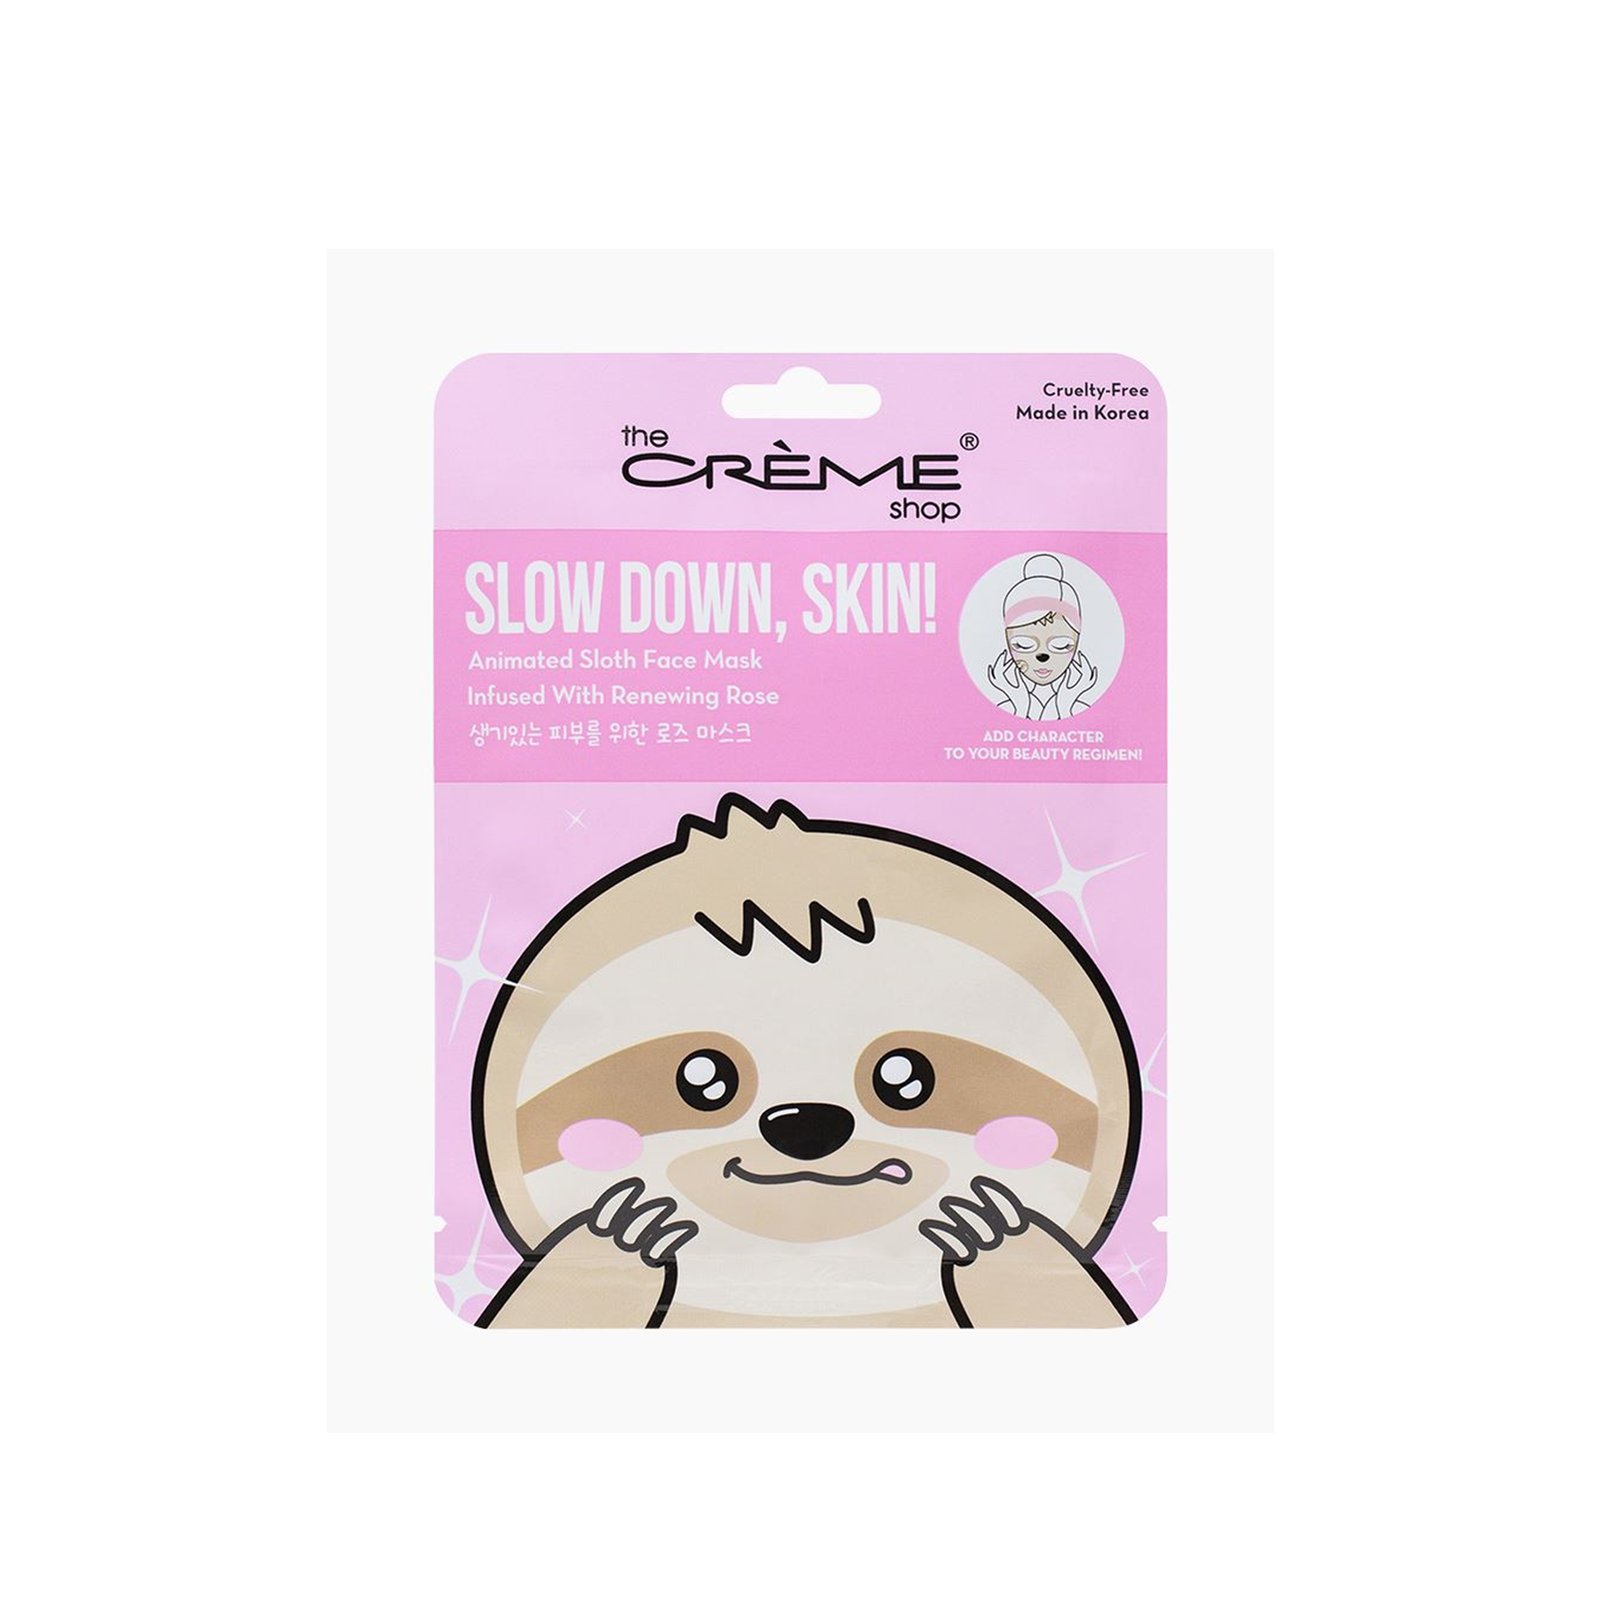 The Crème Shop Slow Down, Skin! Animated Sloth Face Mask 25g